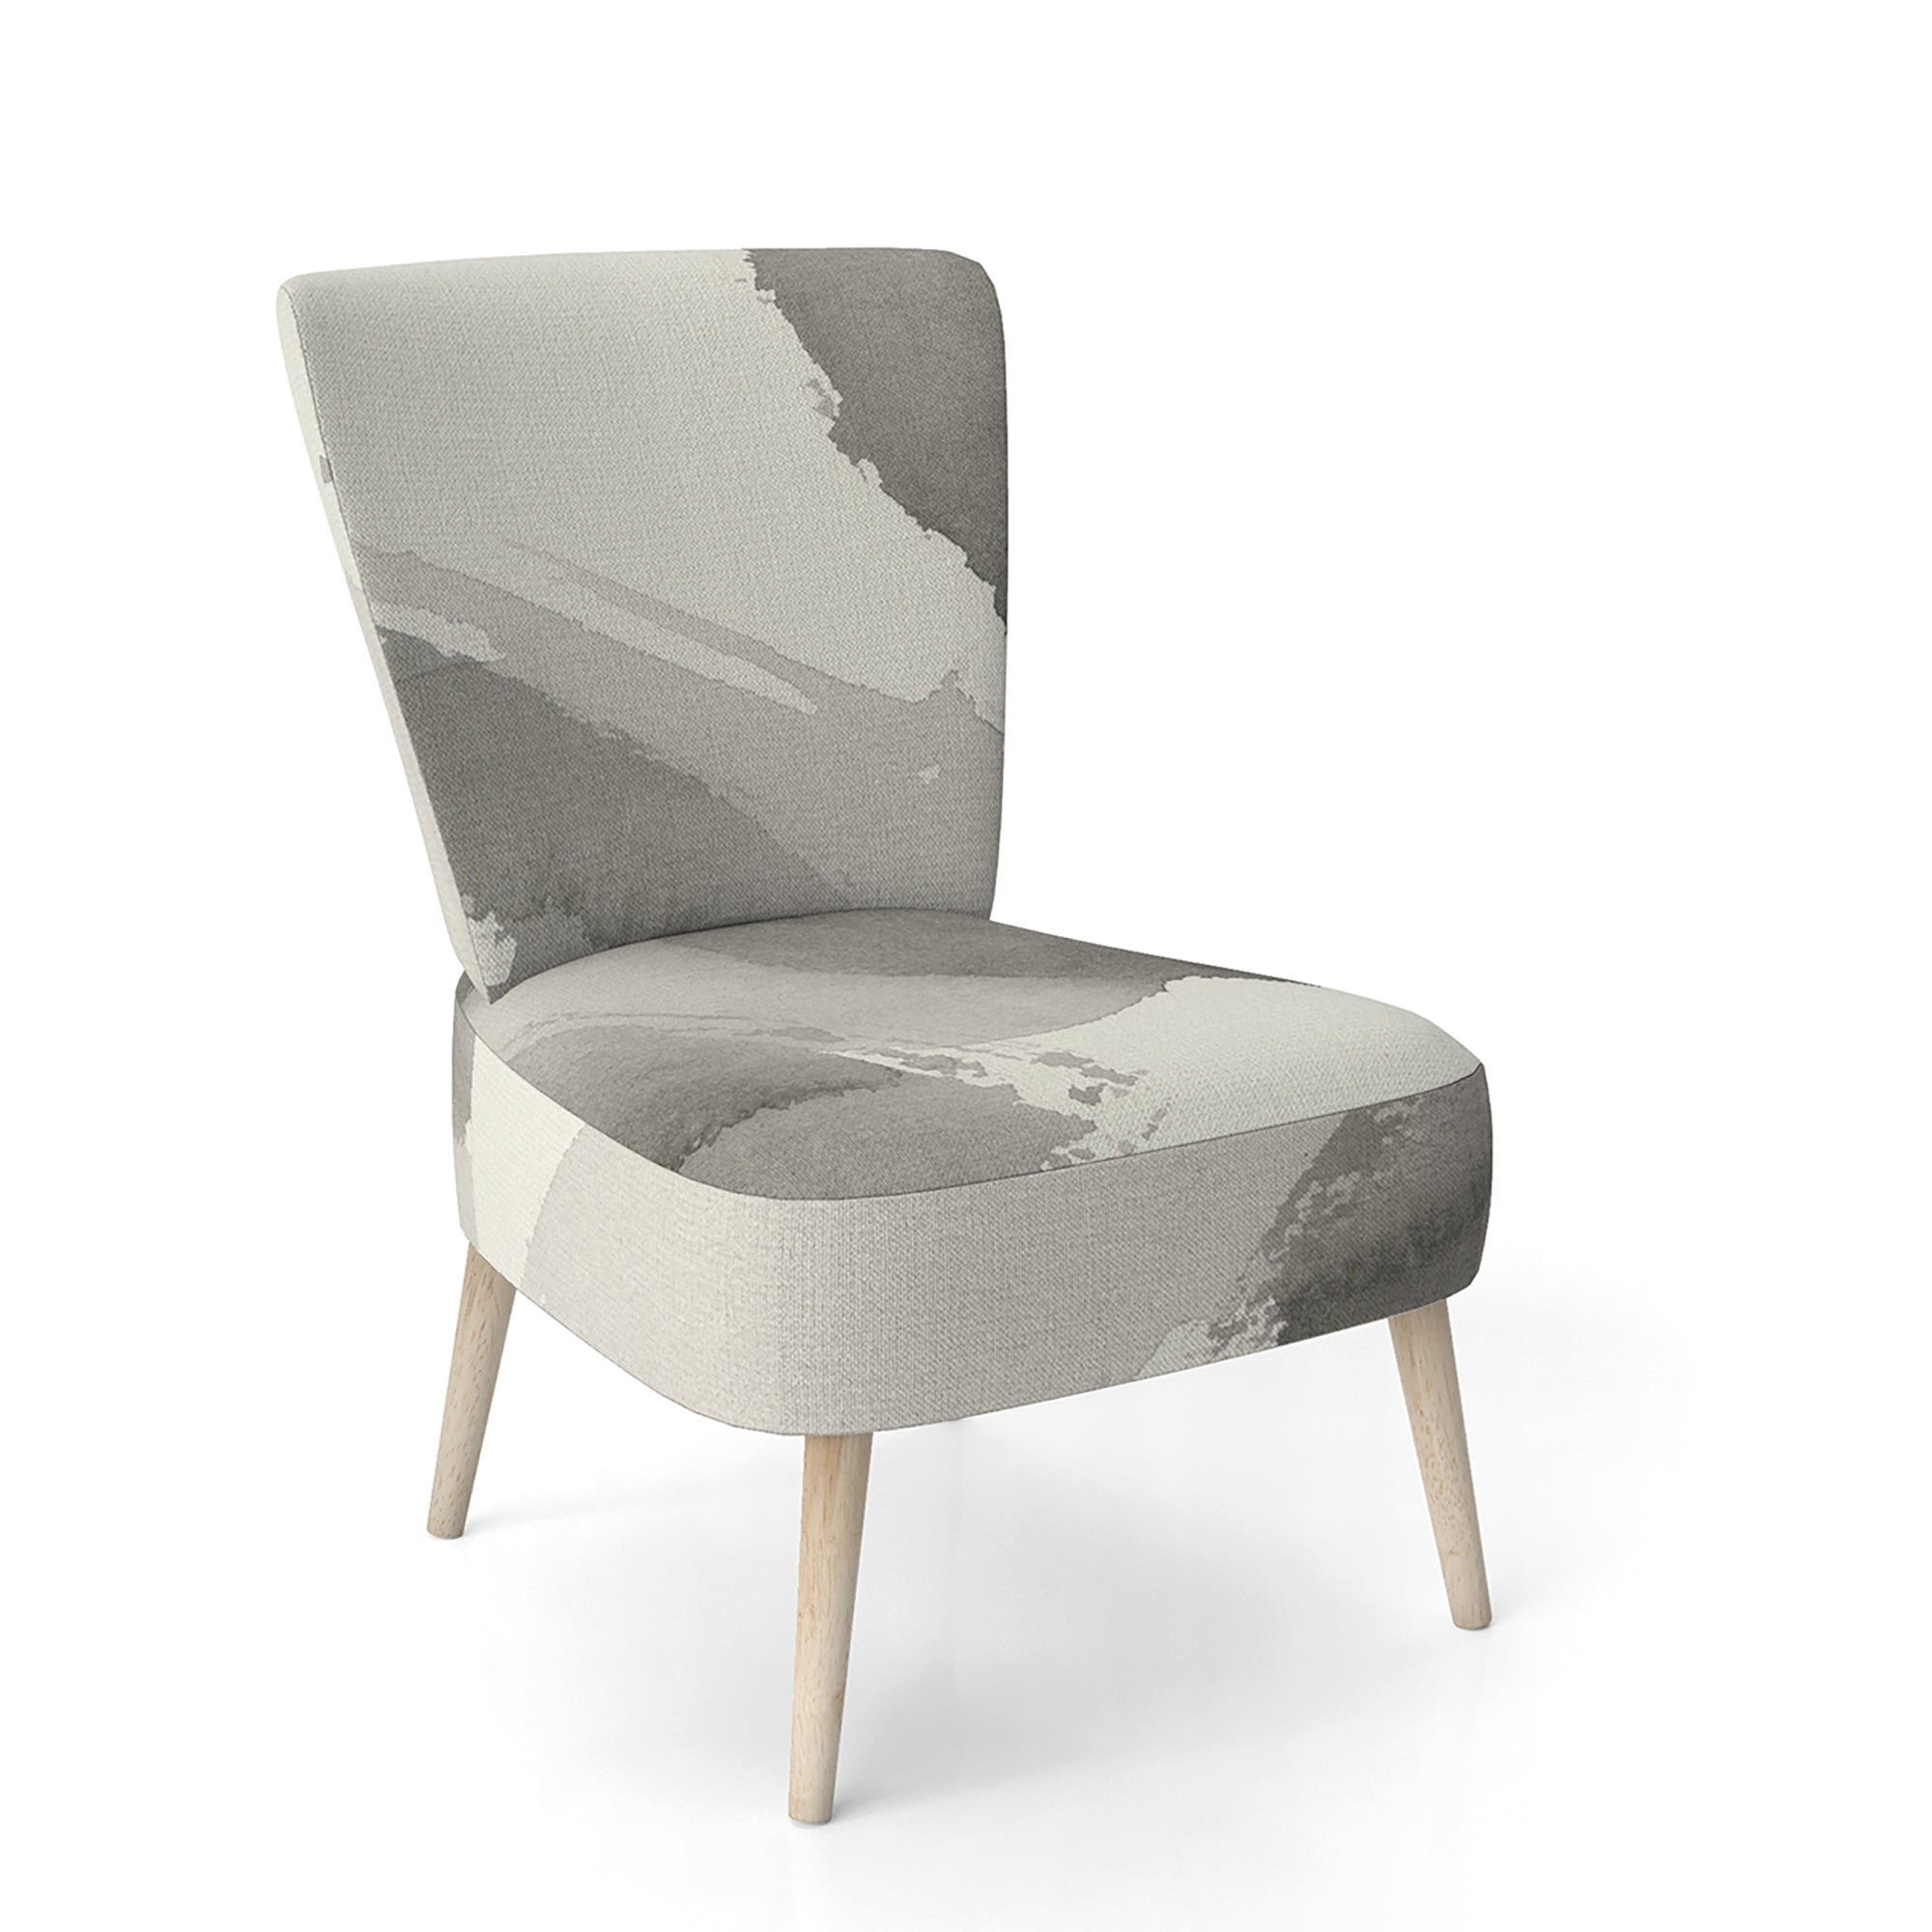 minimal geometric Gesture IV Transitional Accent Chair